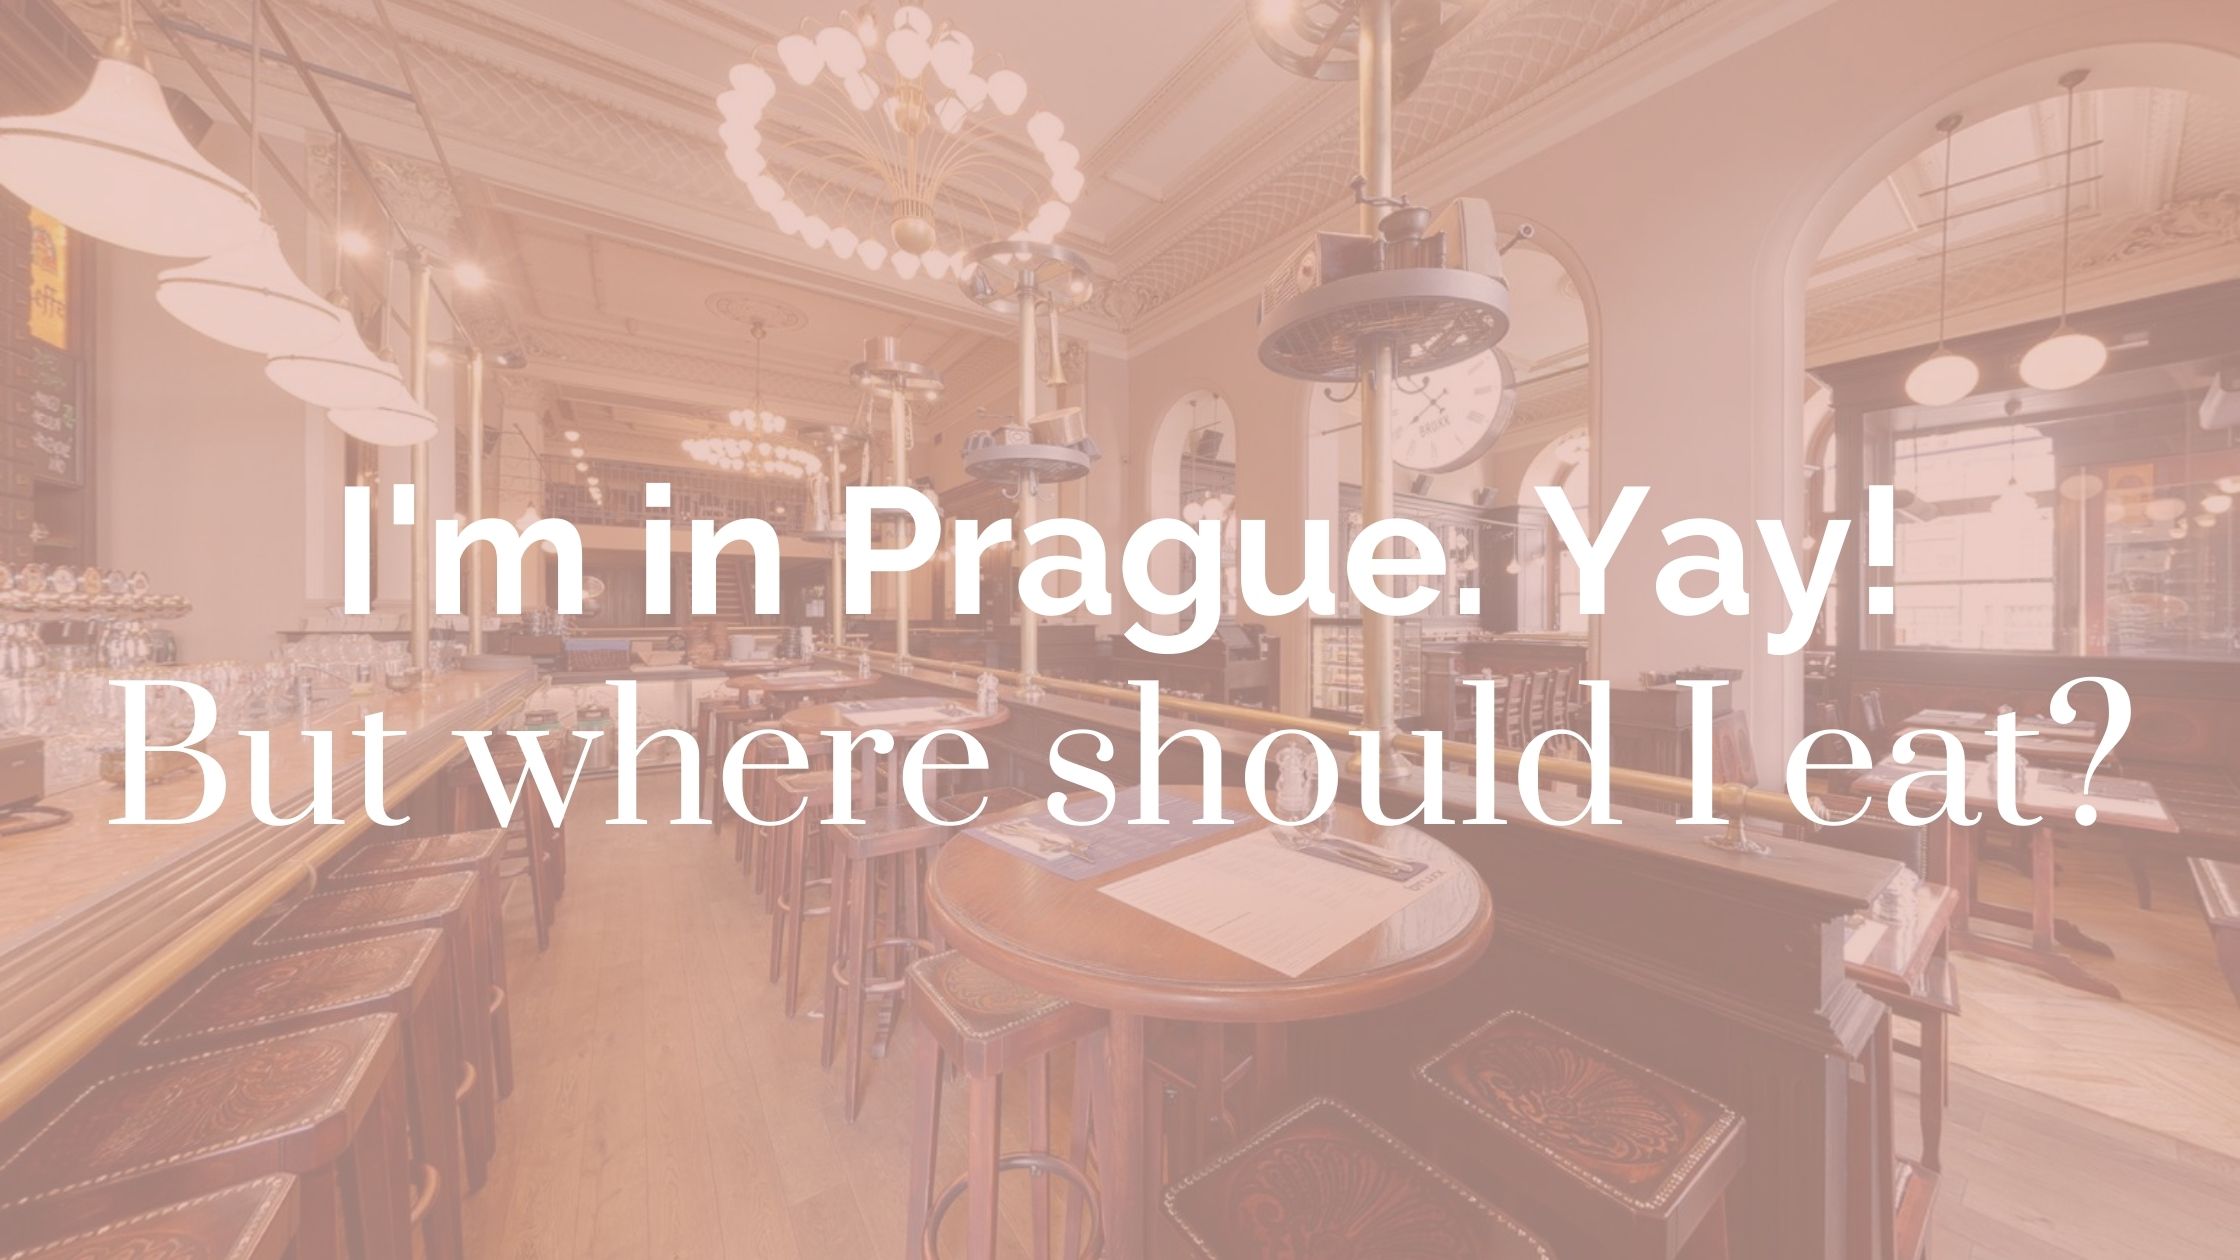 Best restaurants and places to eat in Prague